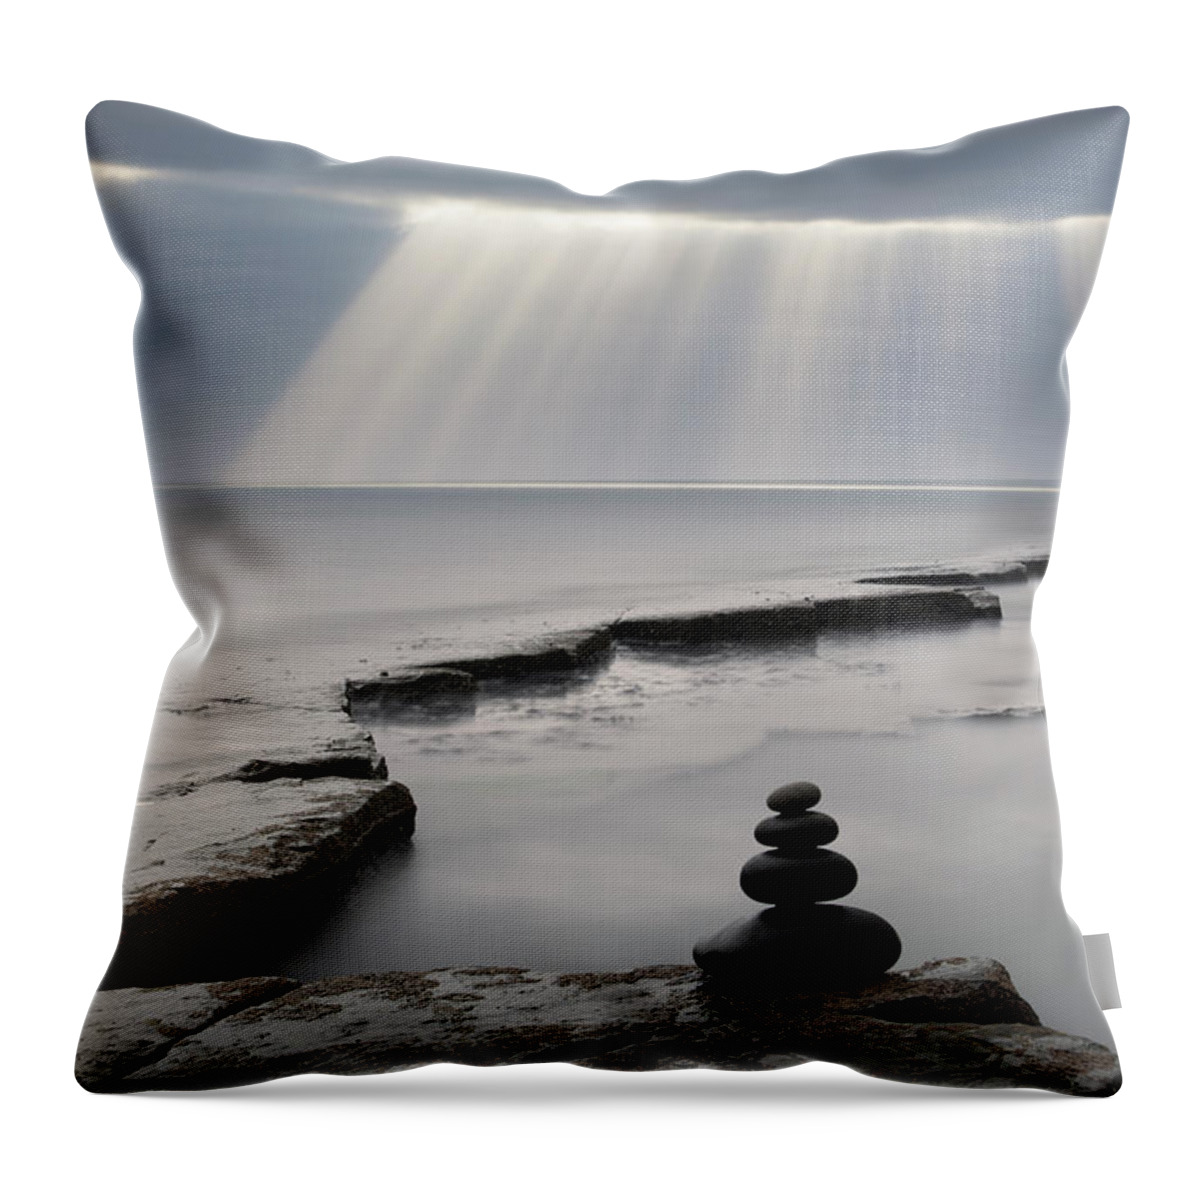 Tranquility Throw Pillow featuring the photograph Pebbles, Kimmeridge Bay, Dorset, Uk by Travelpix Ltd